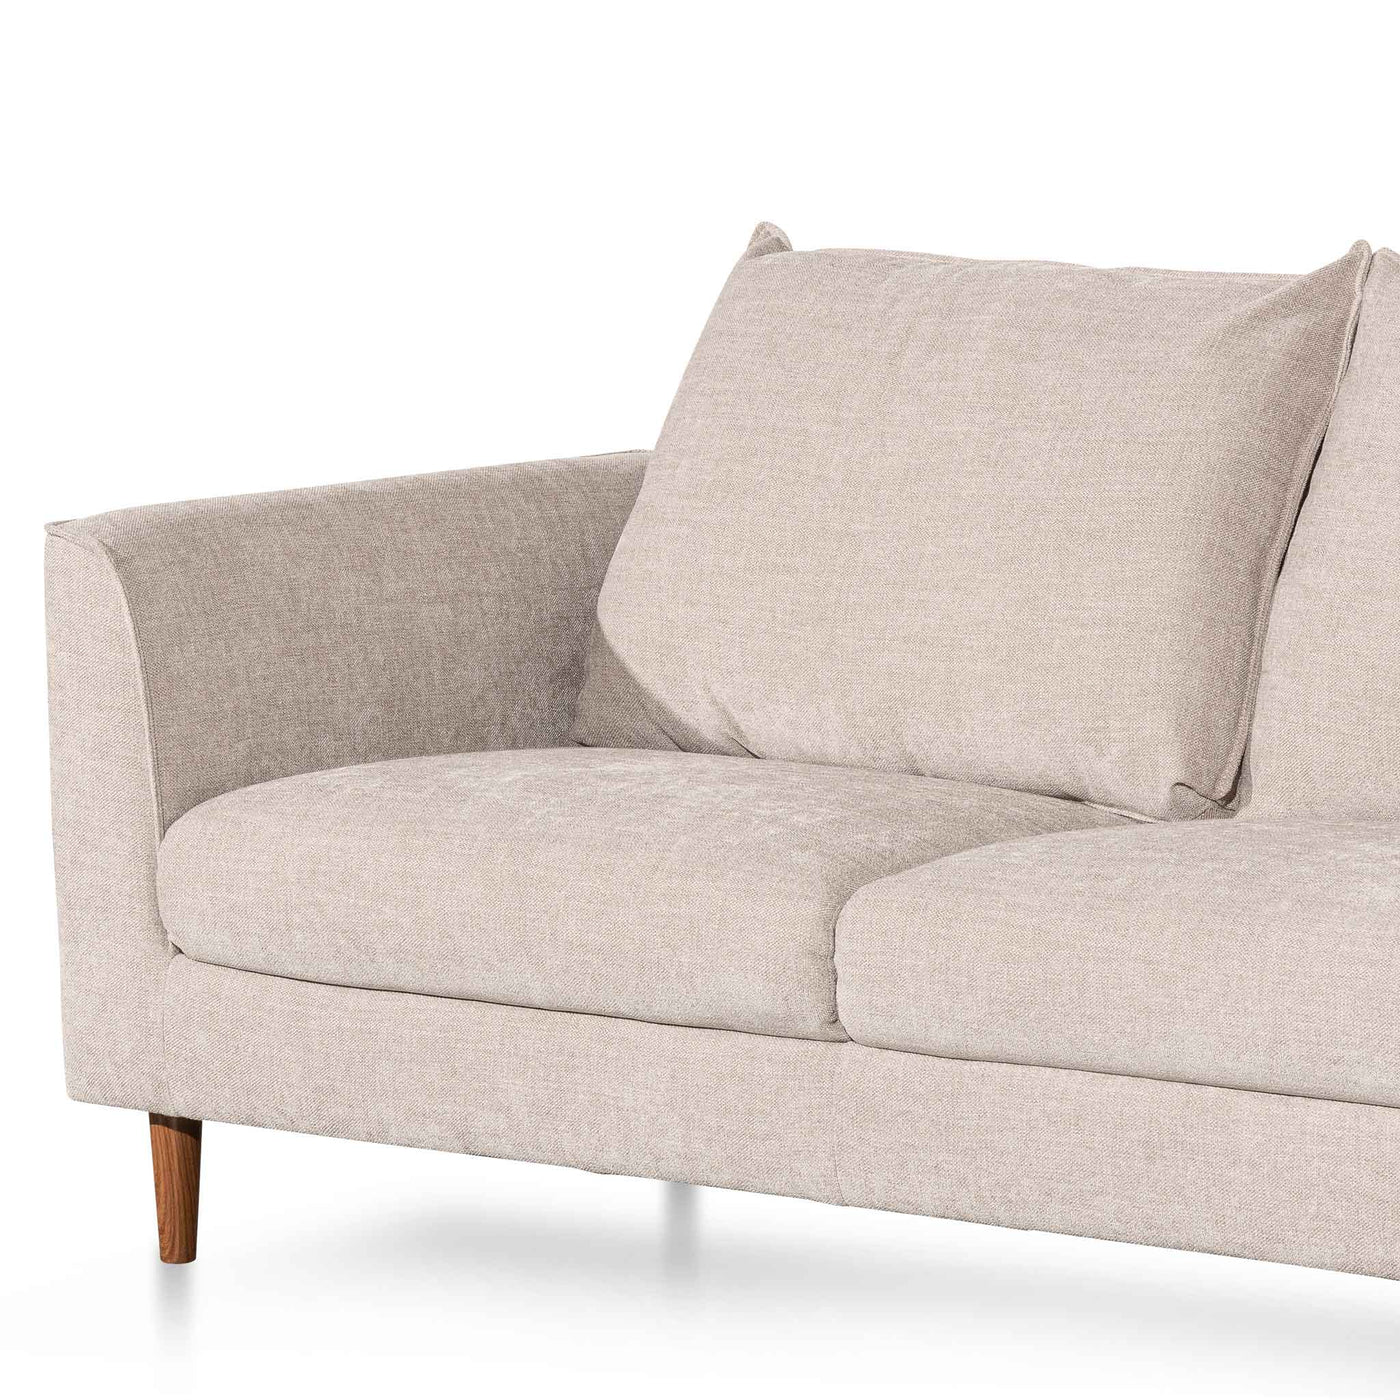 2 Seater Fabric Sofa - Oyster Beige